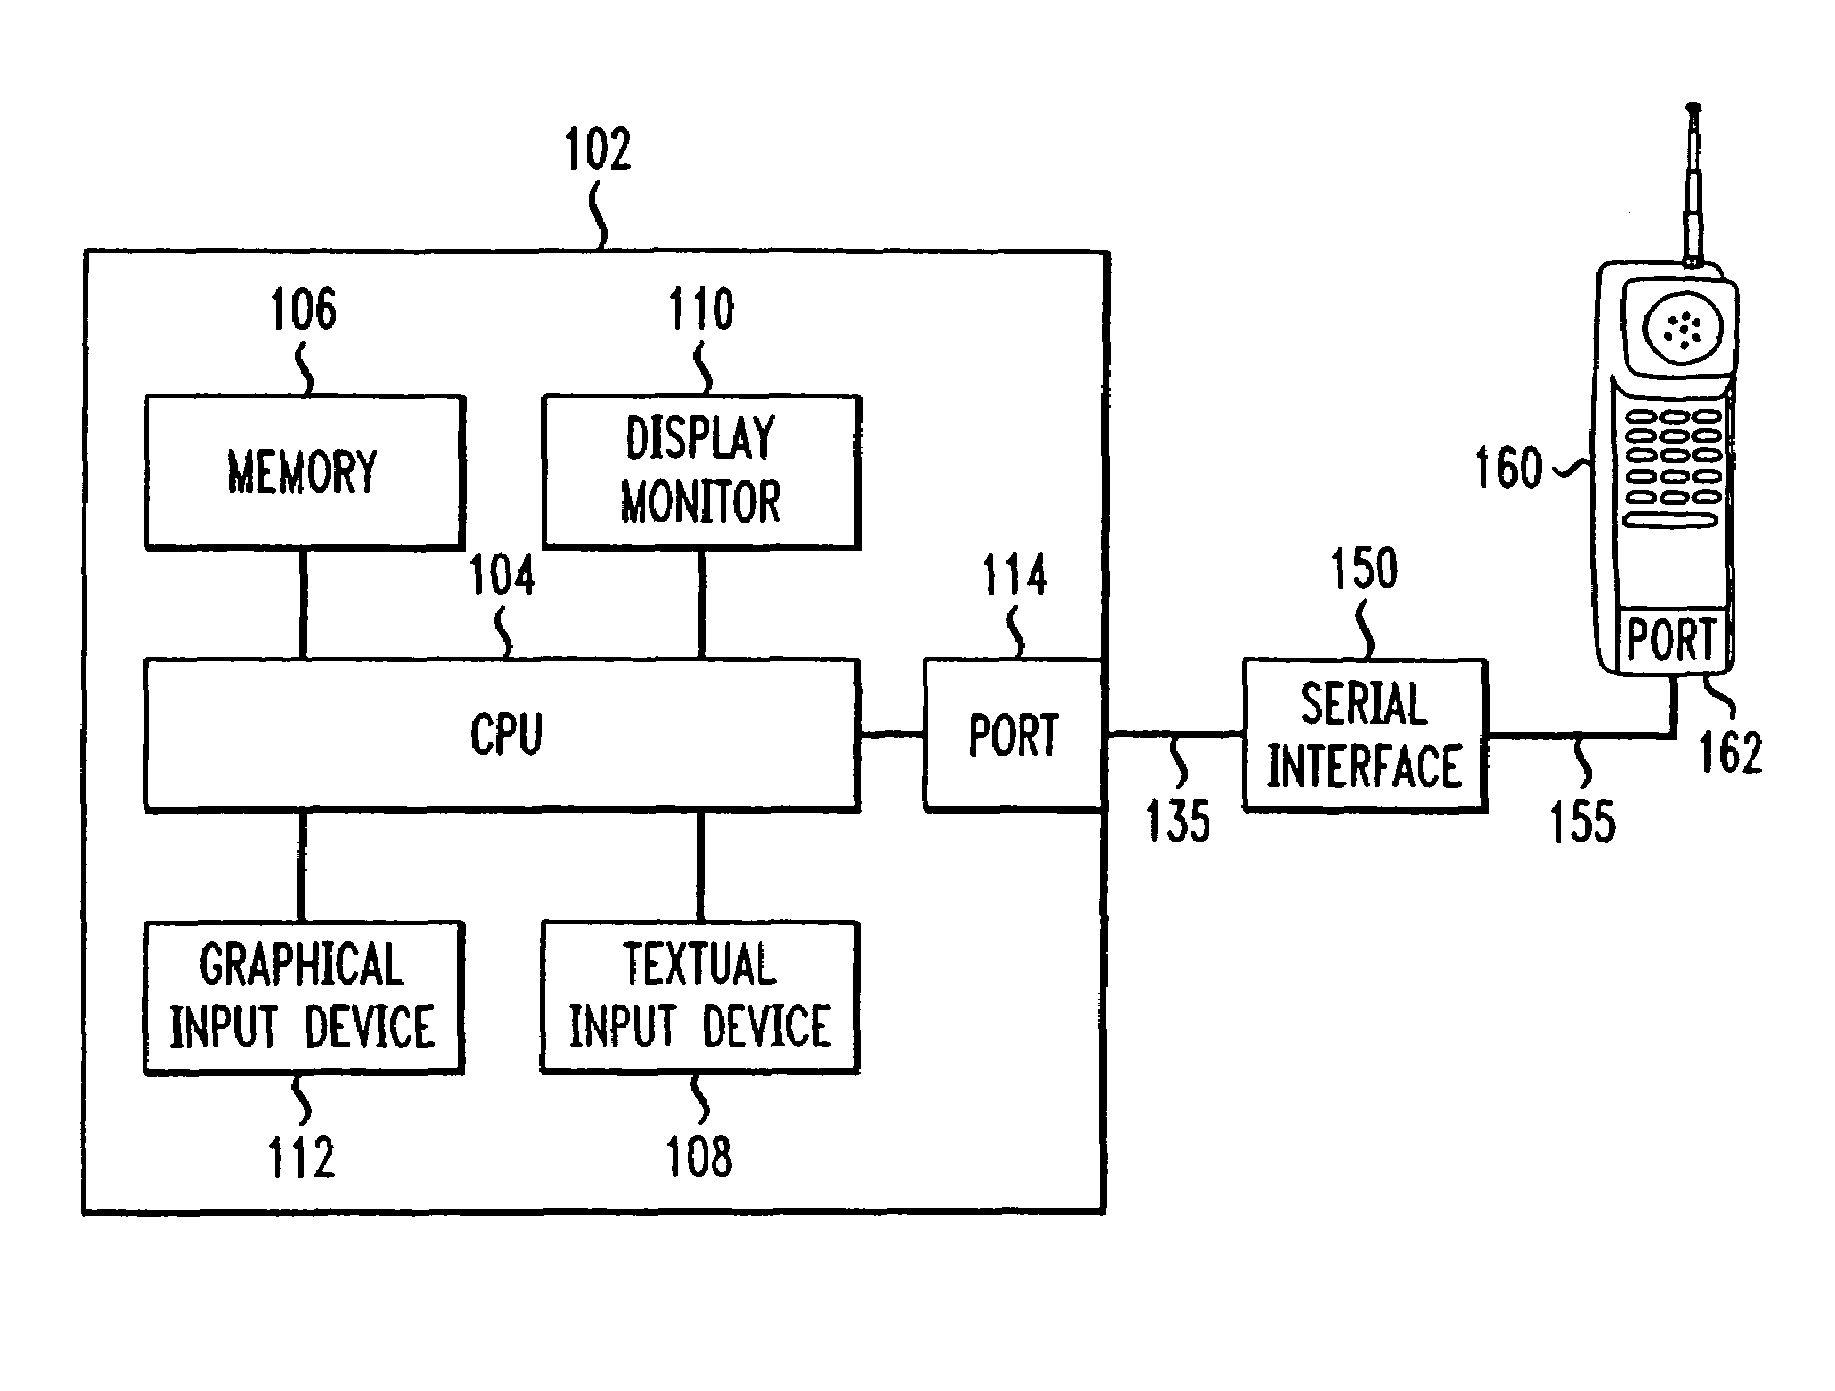 Method and apparatus for storing activation data in a cellular telephone